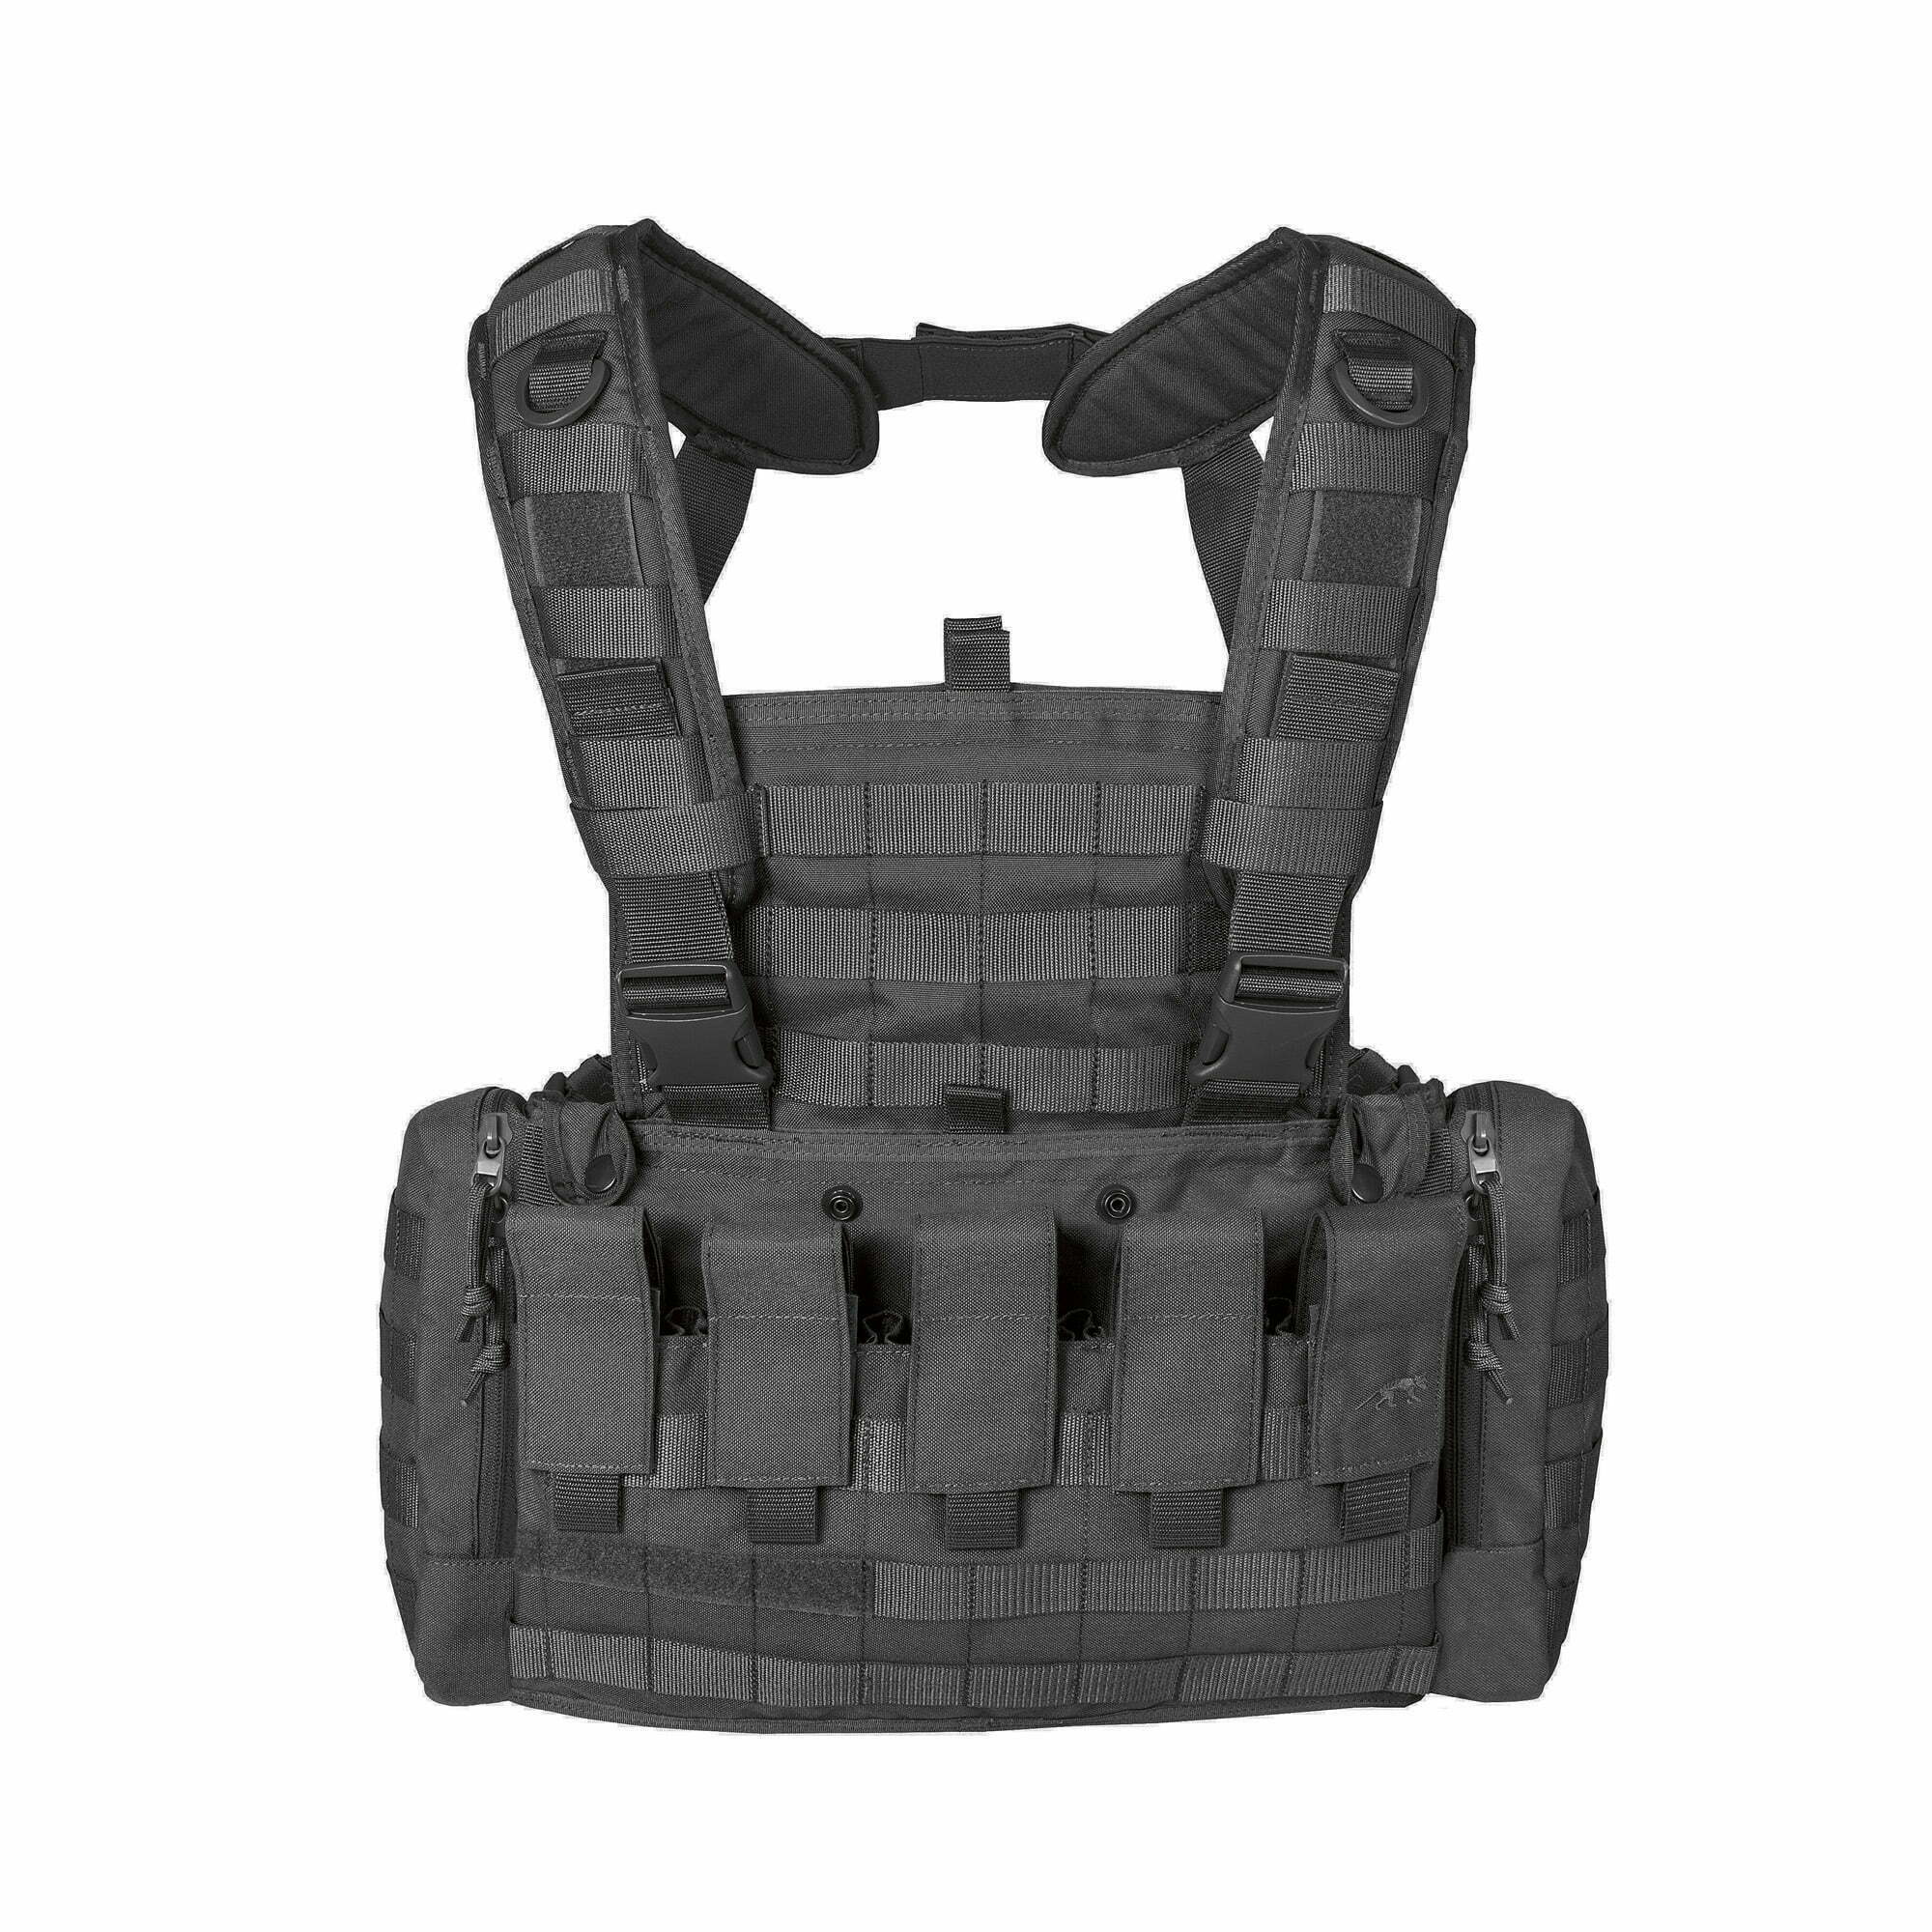 03_7160-TT-Chest-Rig-MKII_M4_Olive.eps